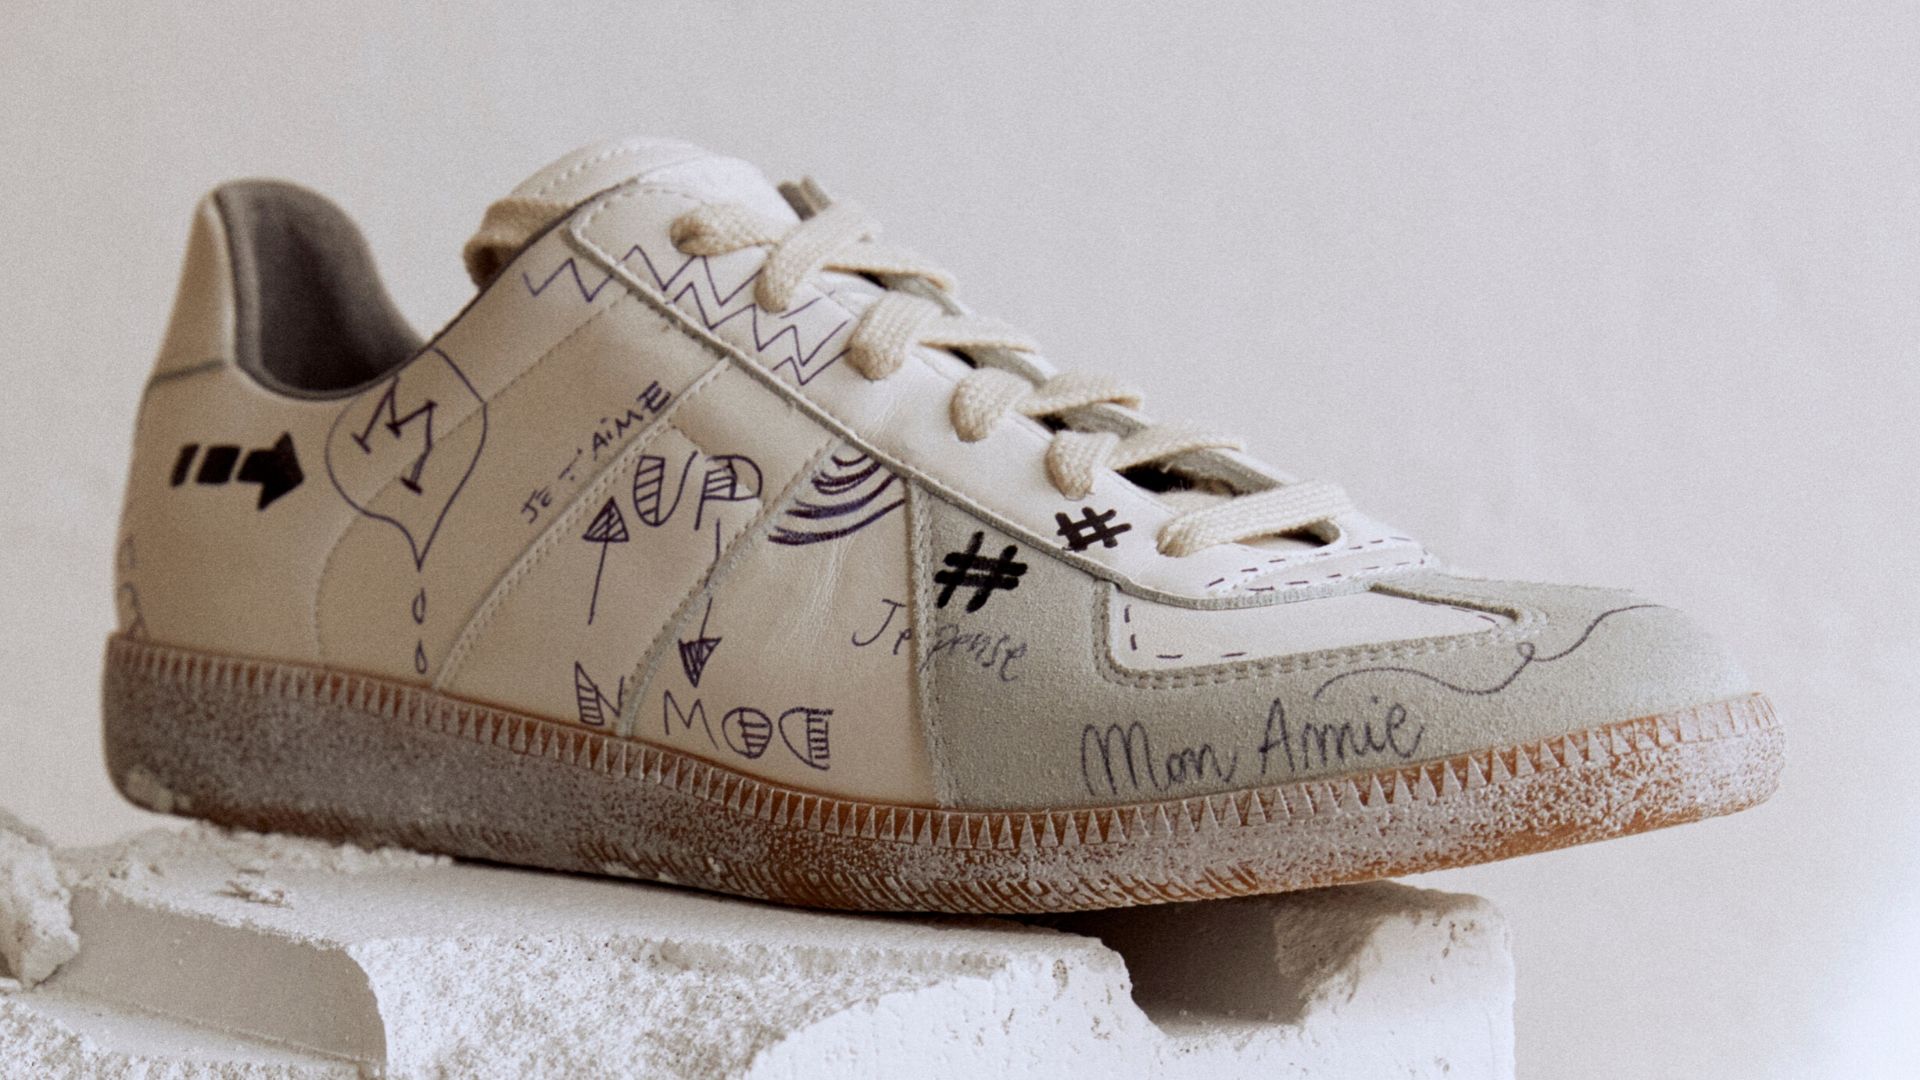 Maison Margiela launch their ‘Vintage Replica’ trainers exclusively on